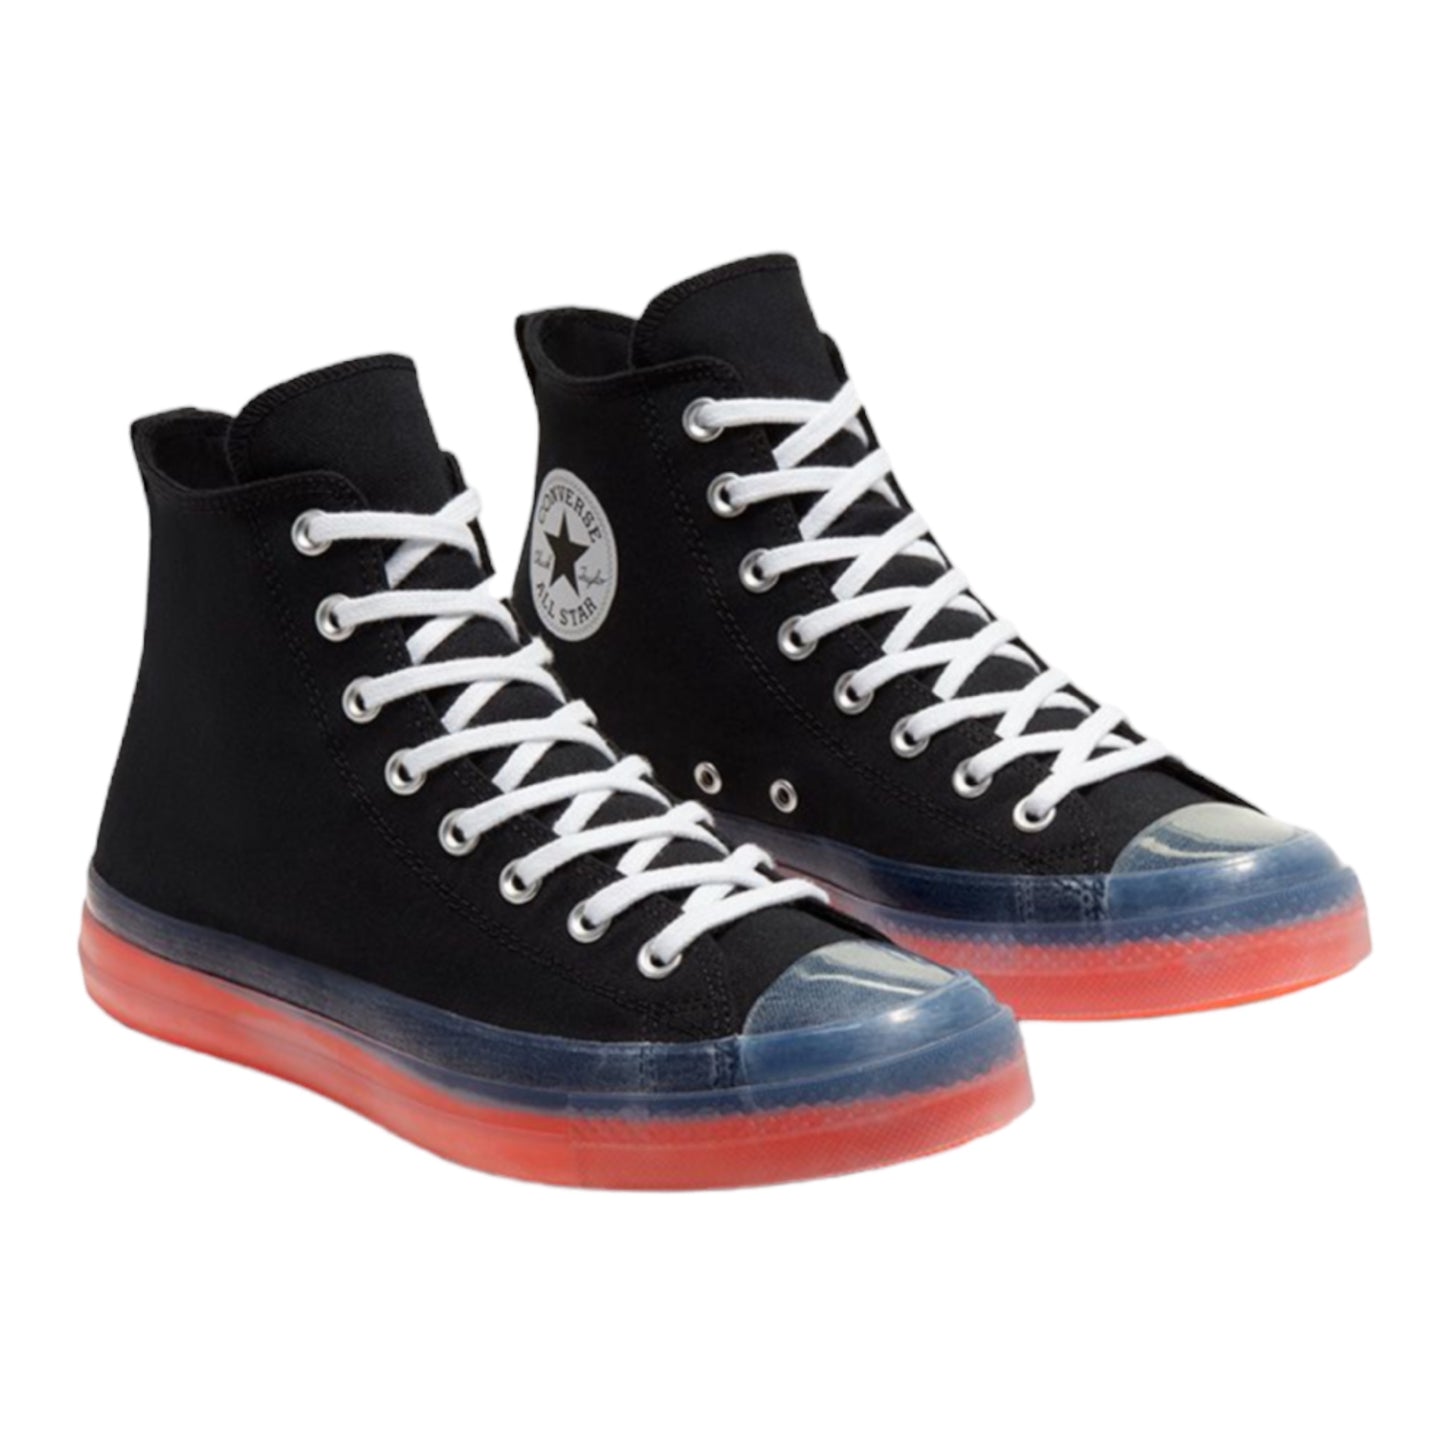 Chuck Taylor All Star CX High Top Size 5 New in Box